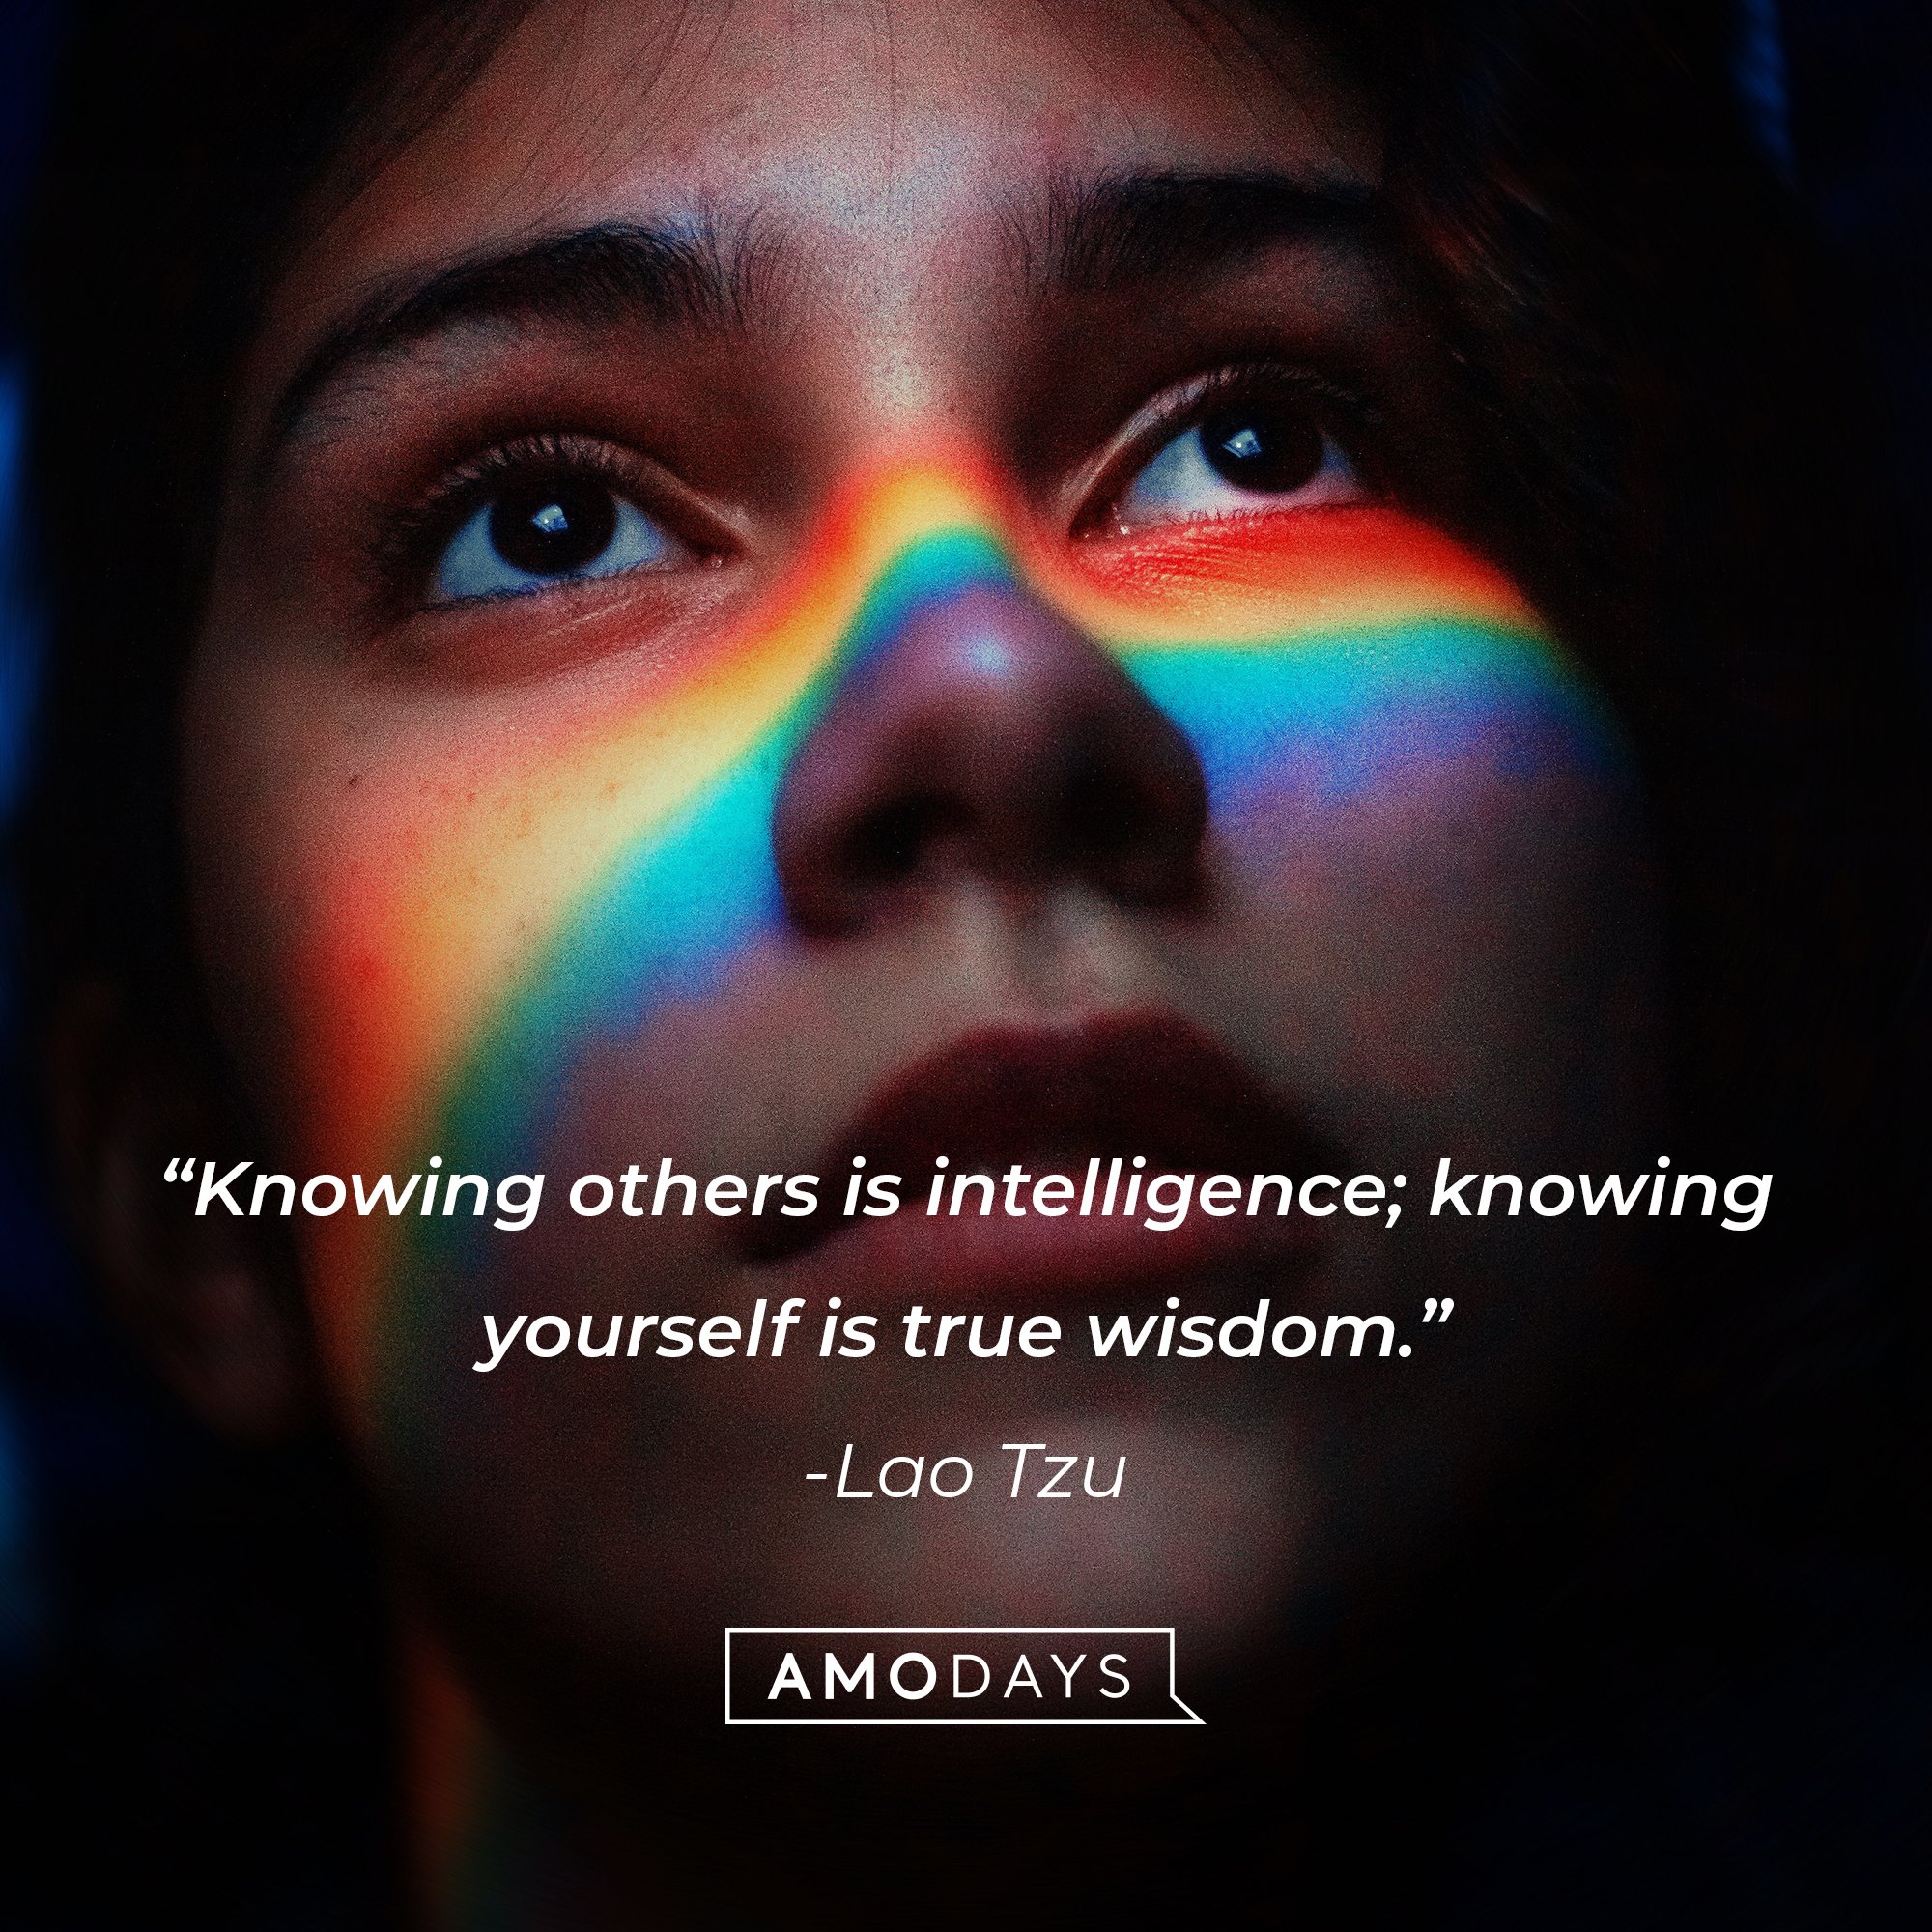  Lao-Tzu's quote: “Knowing others is intelligence; knowing yourself is true wisdom. Mastering others is strength; mastering yourself is true power.” | Image: AmoDays